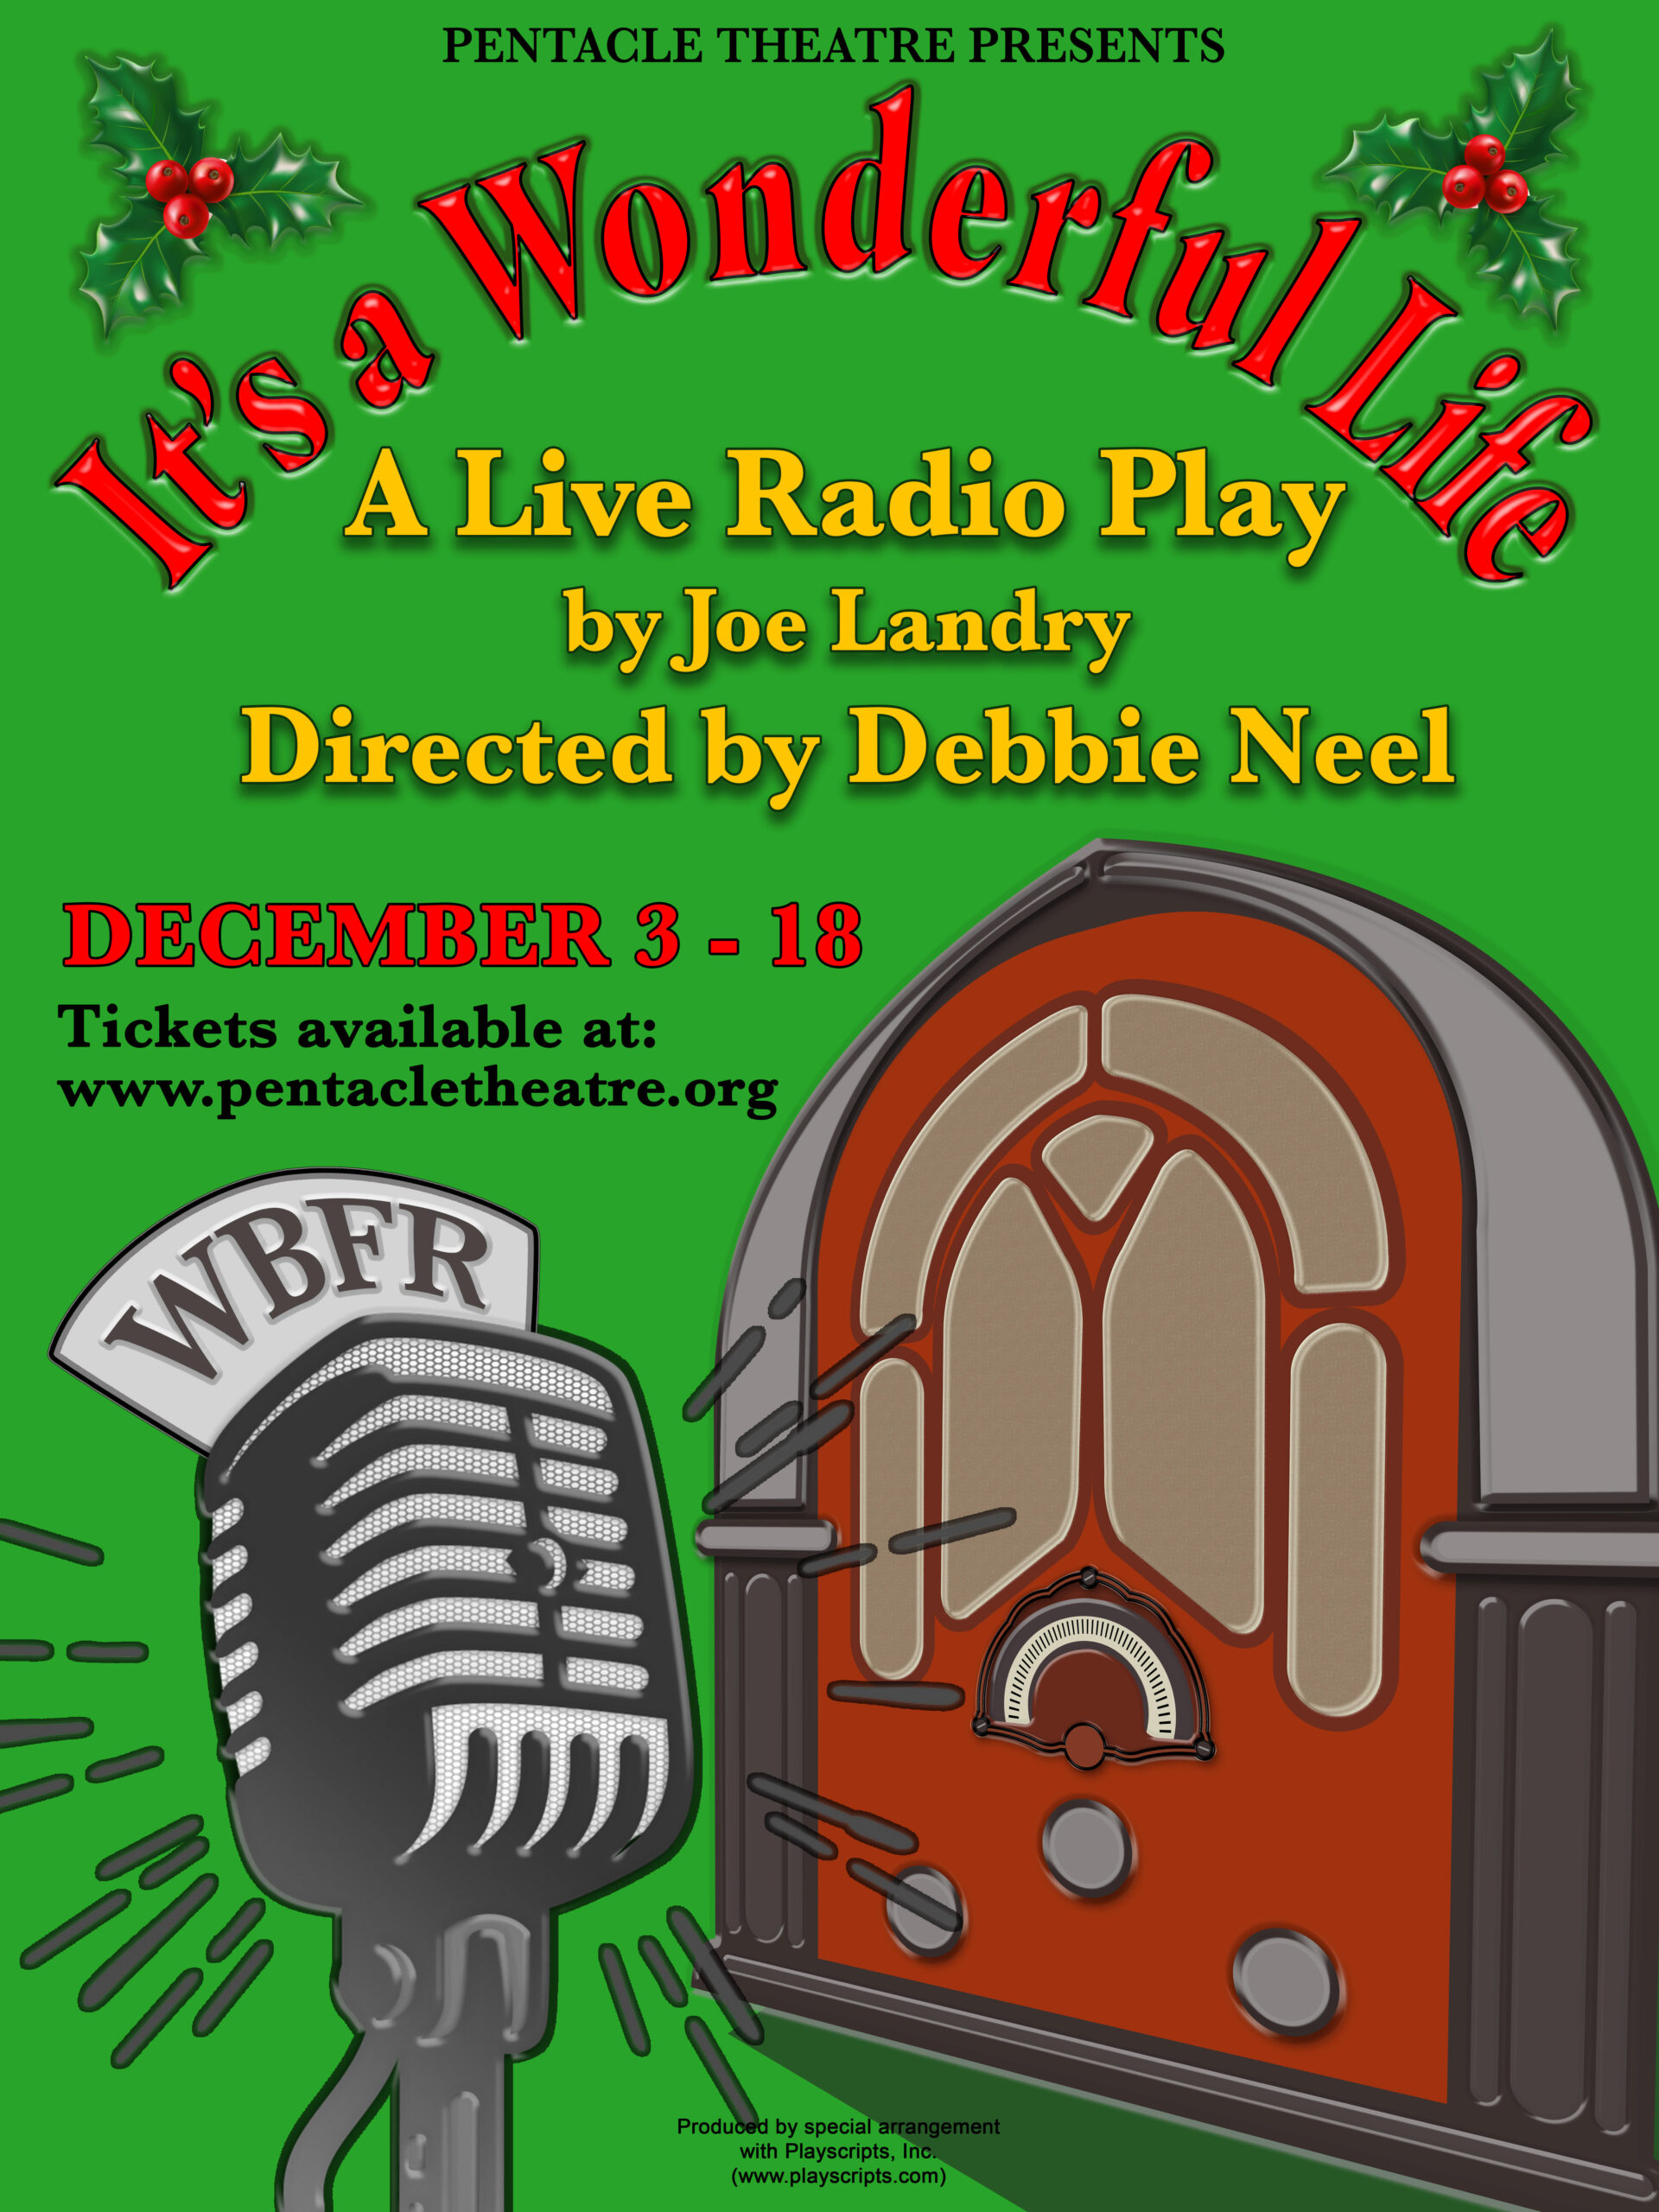 Open auditions for “It’s a Wonderful Life: A Live Radio Play”